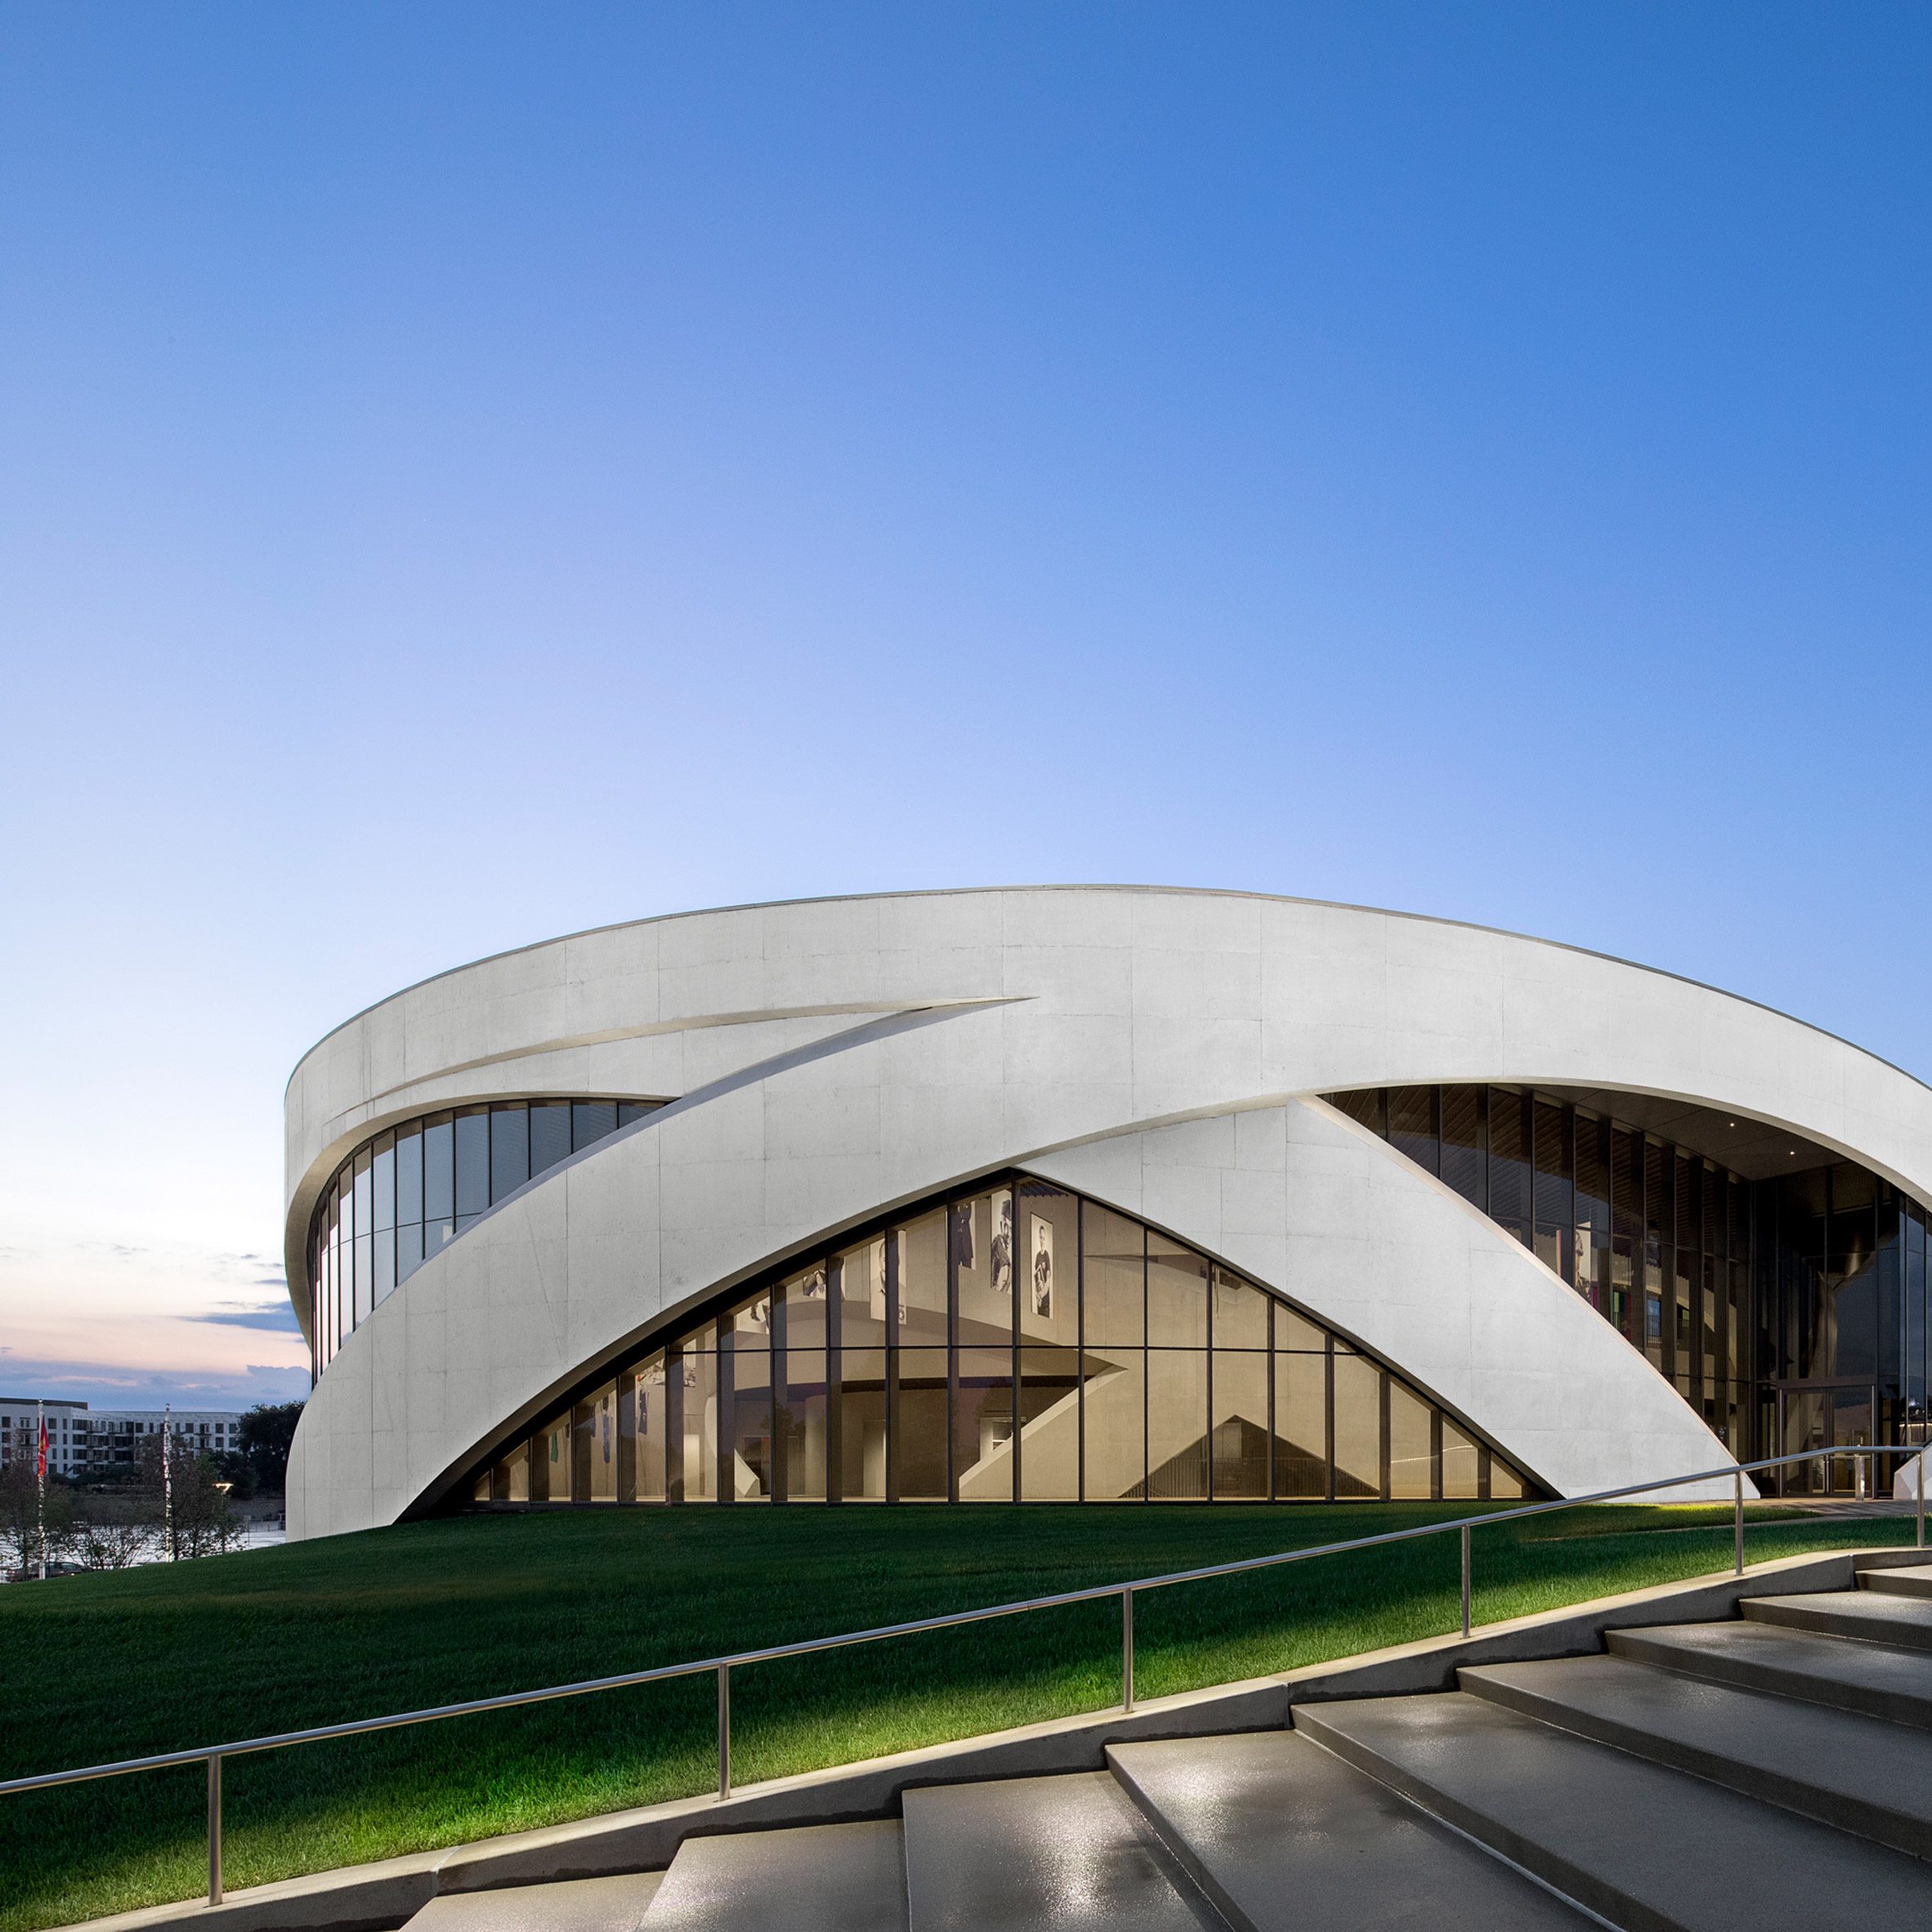 A large circular building with a glass facade and concrete arches enveloping the building